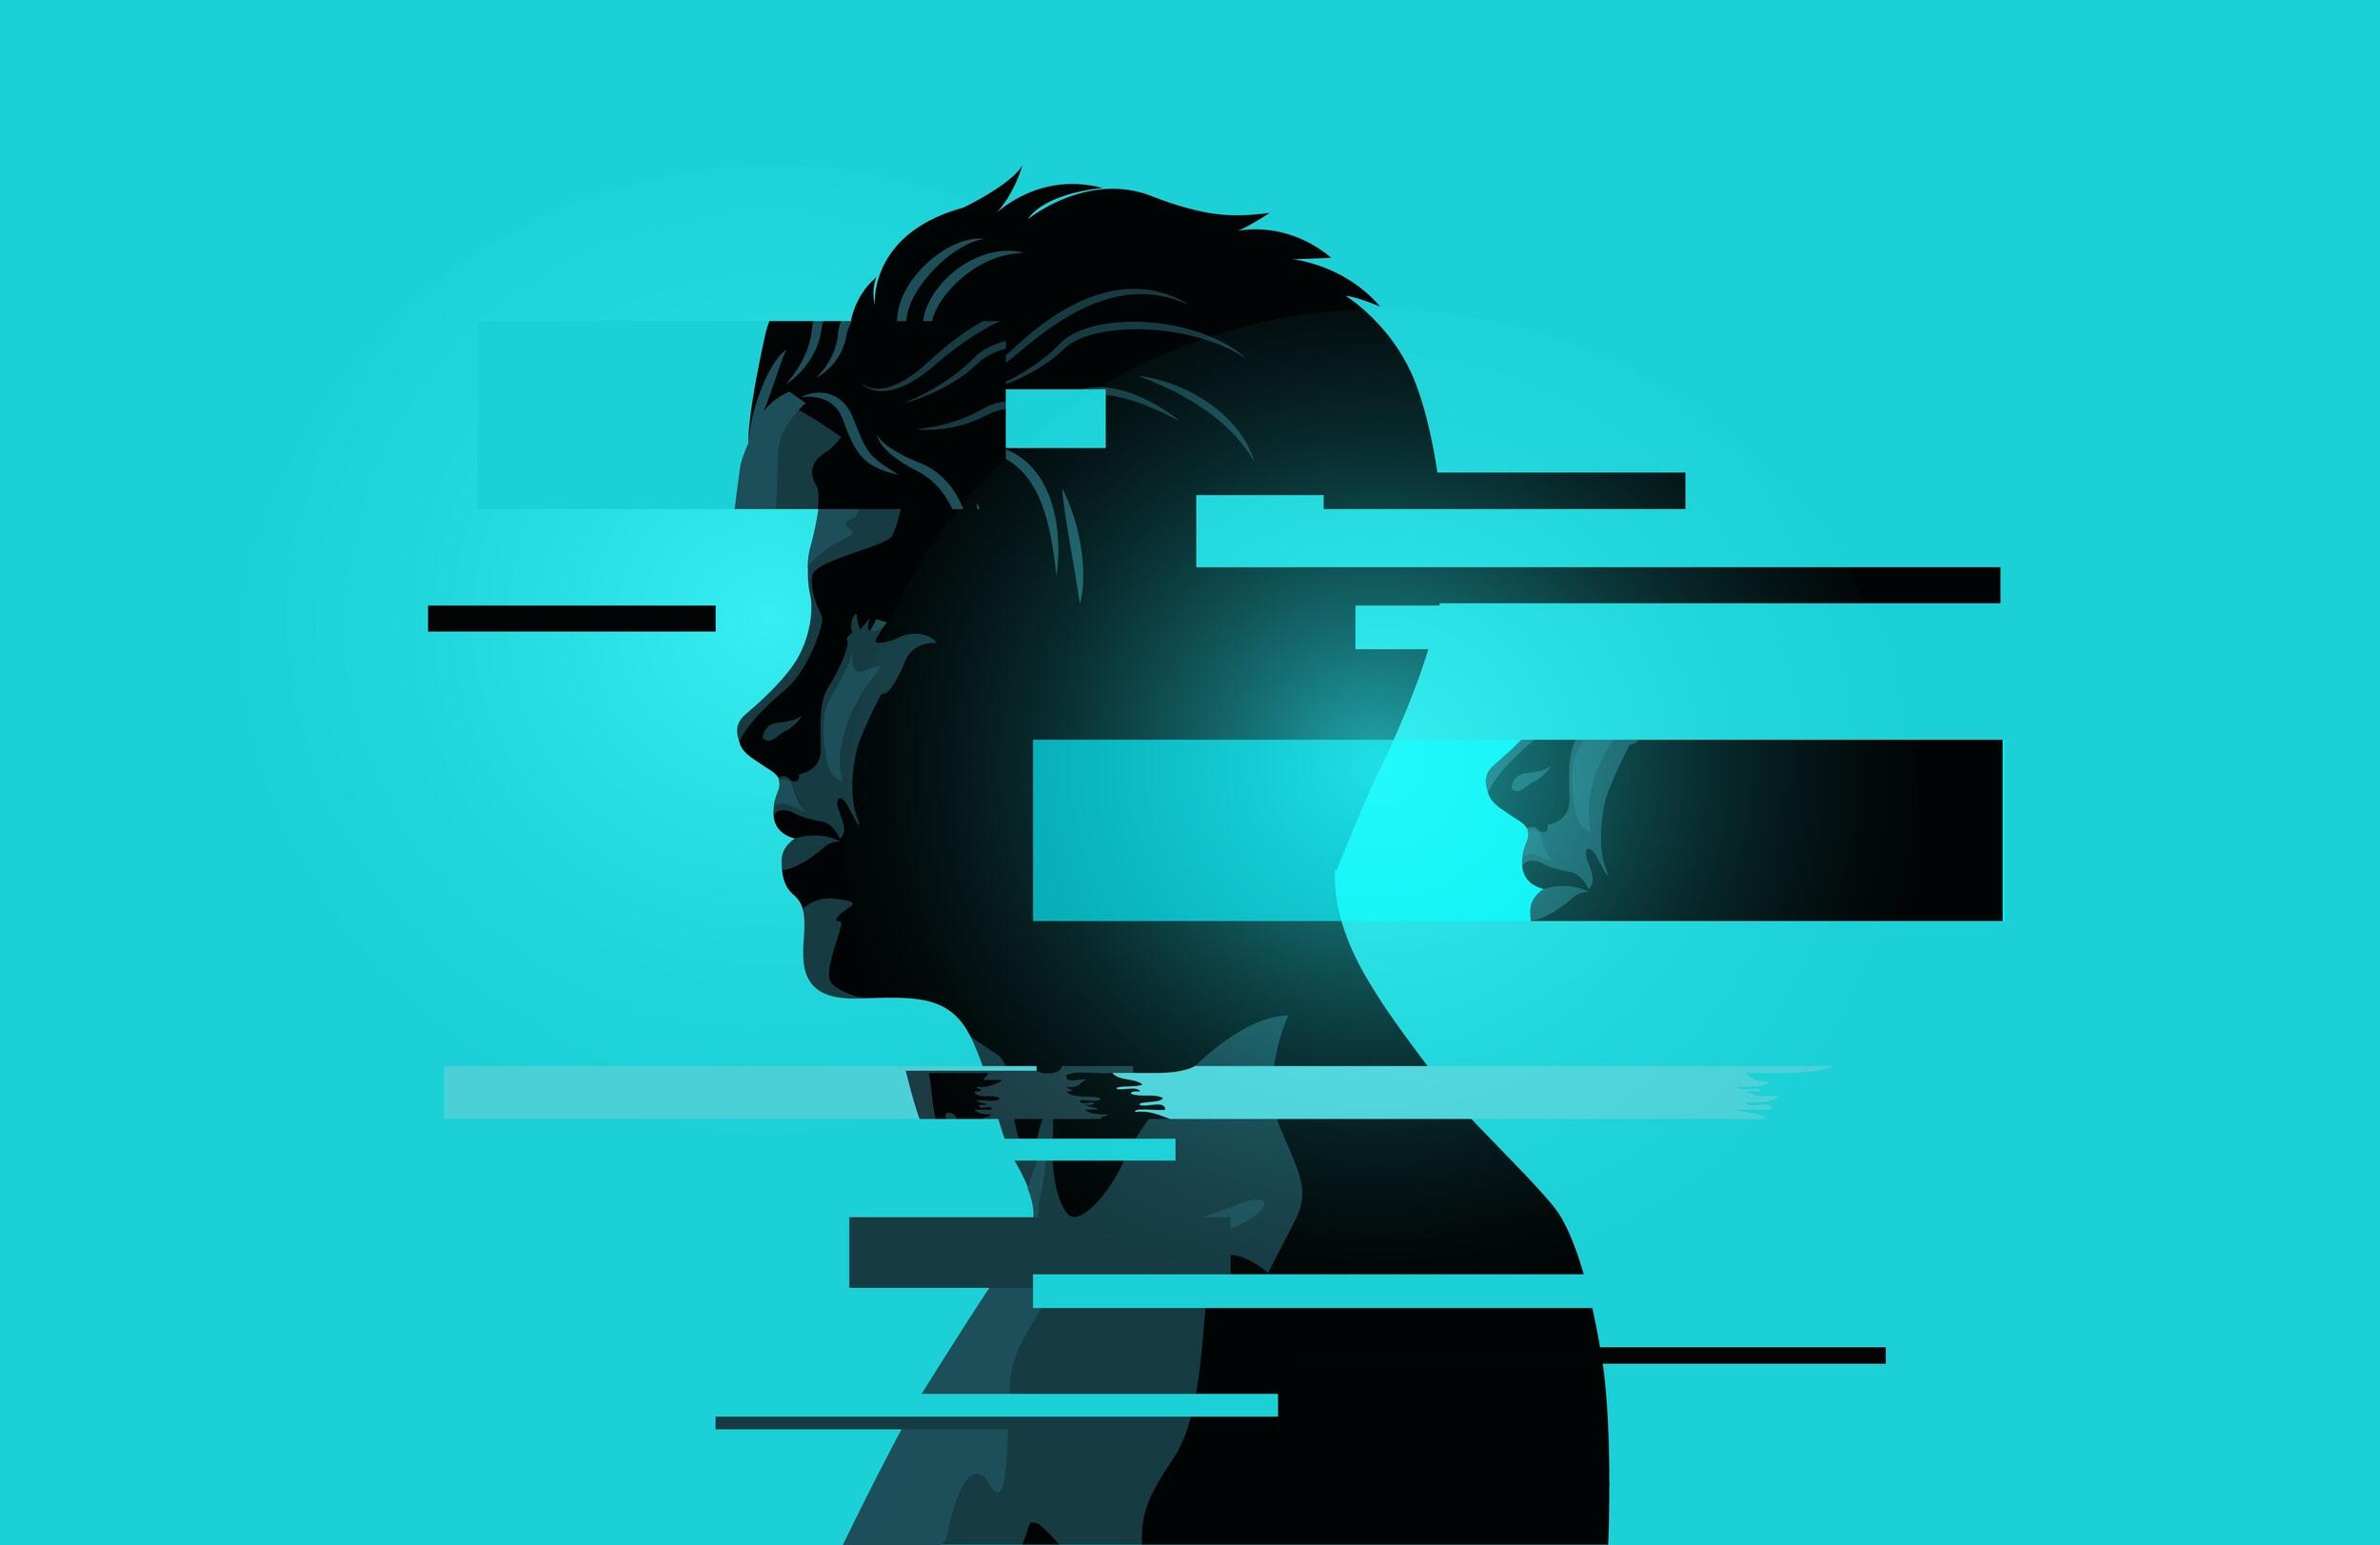 Stylized profile drawing of a person.